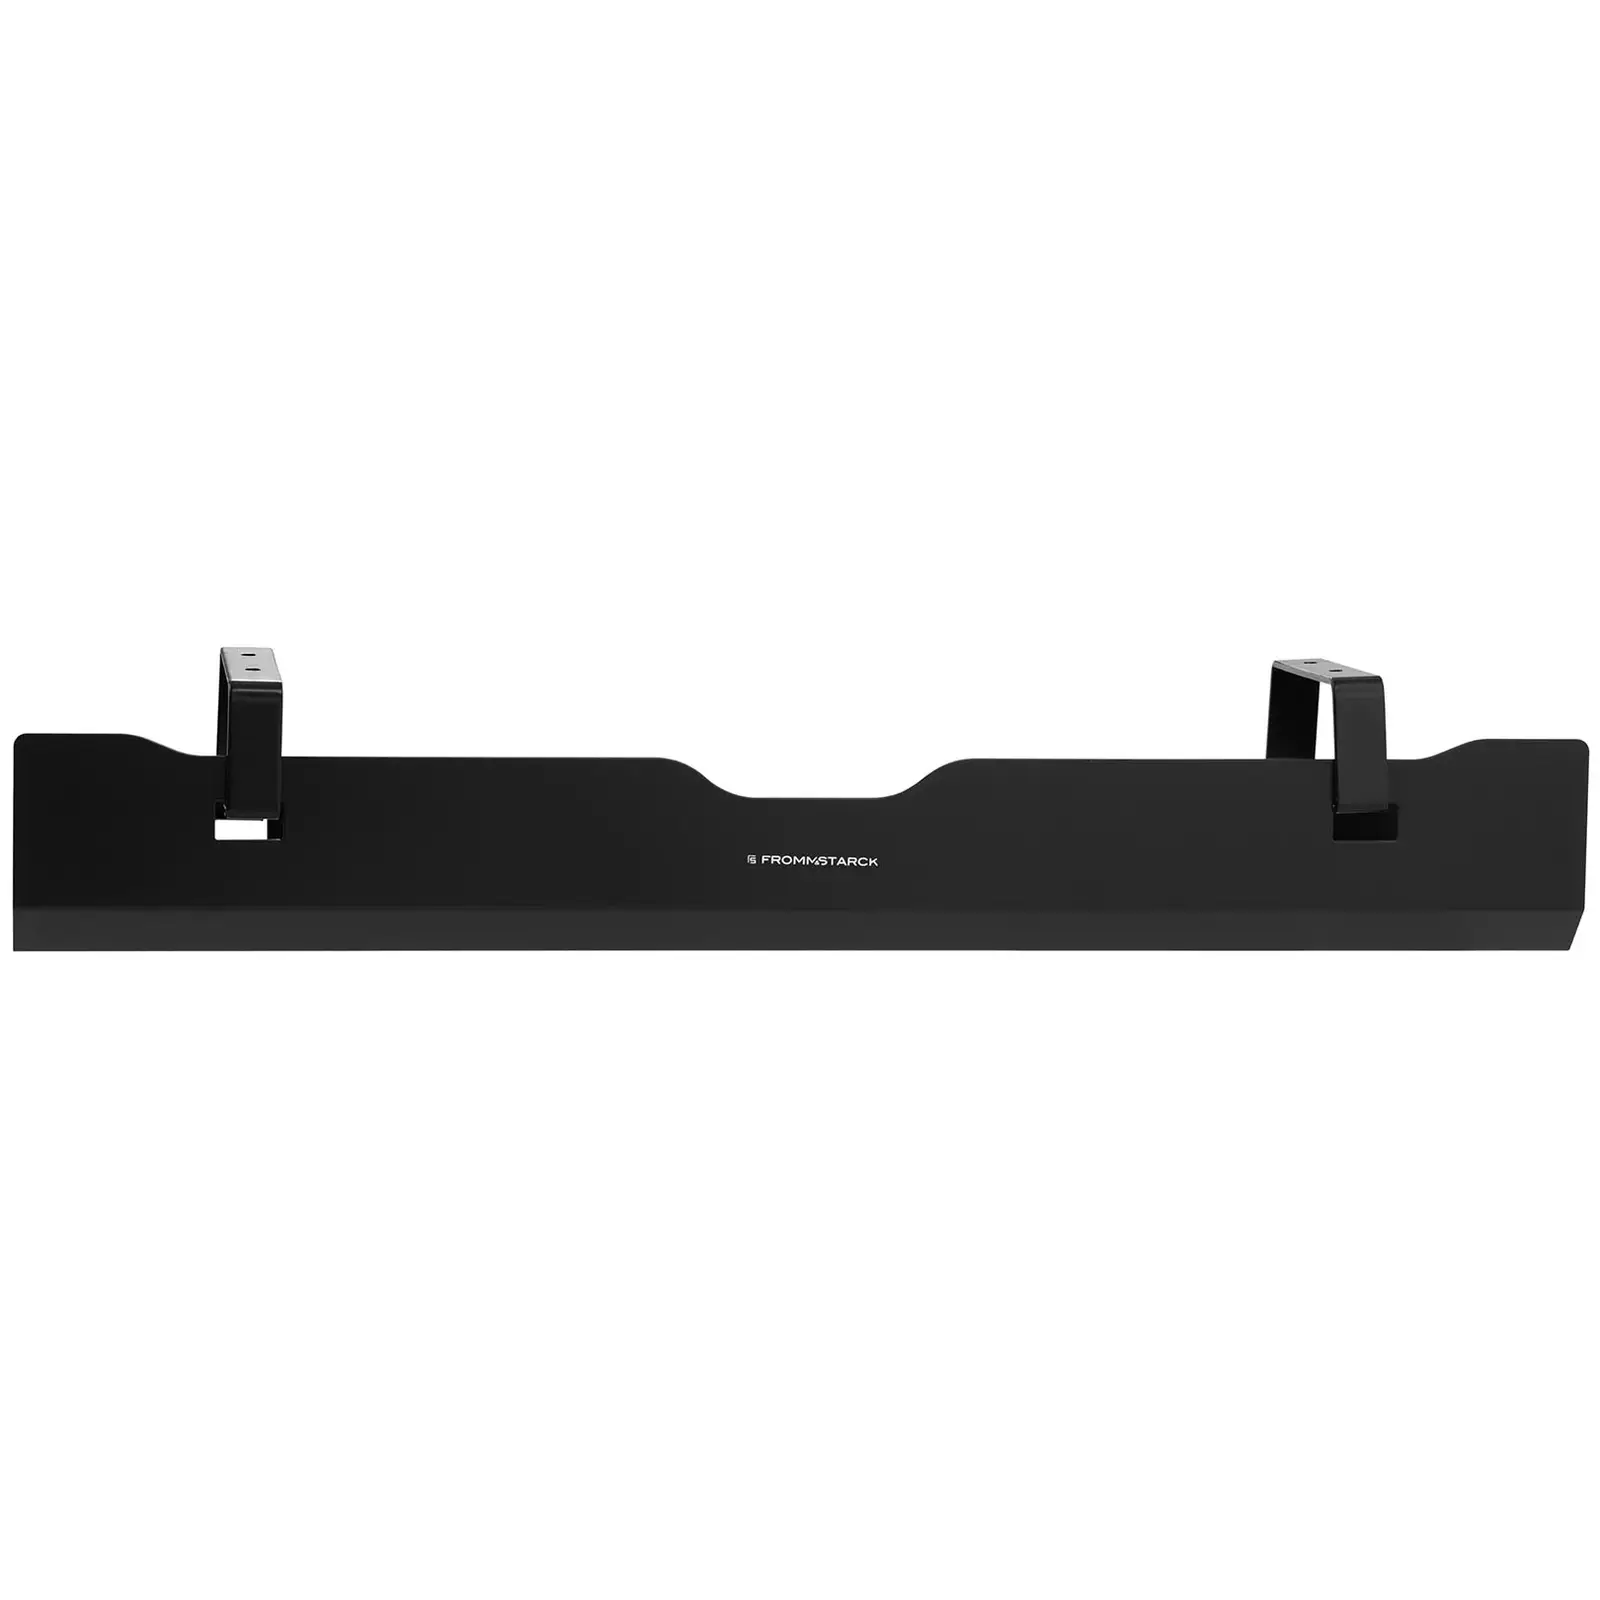 Cable Management Tray - 600 x 135 x 108 mm - Black